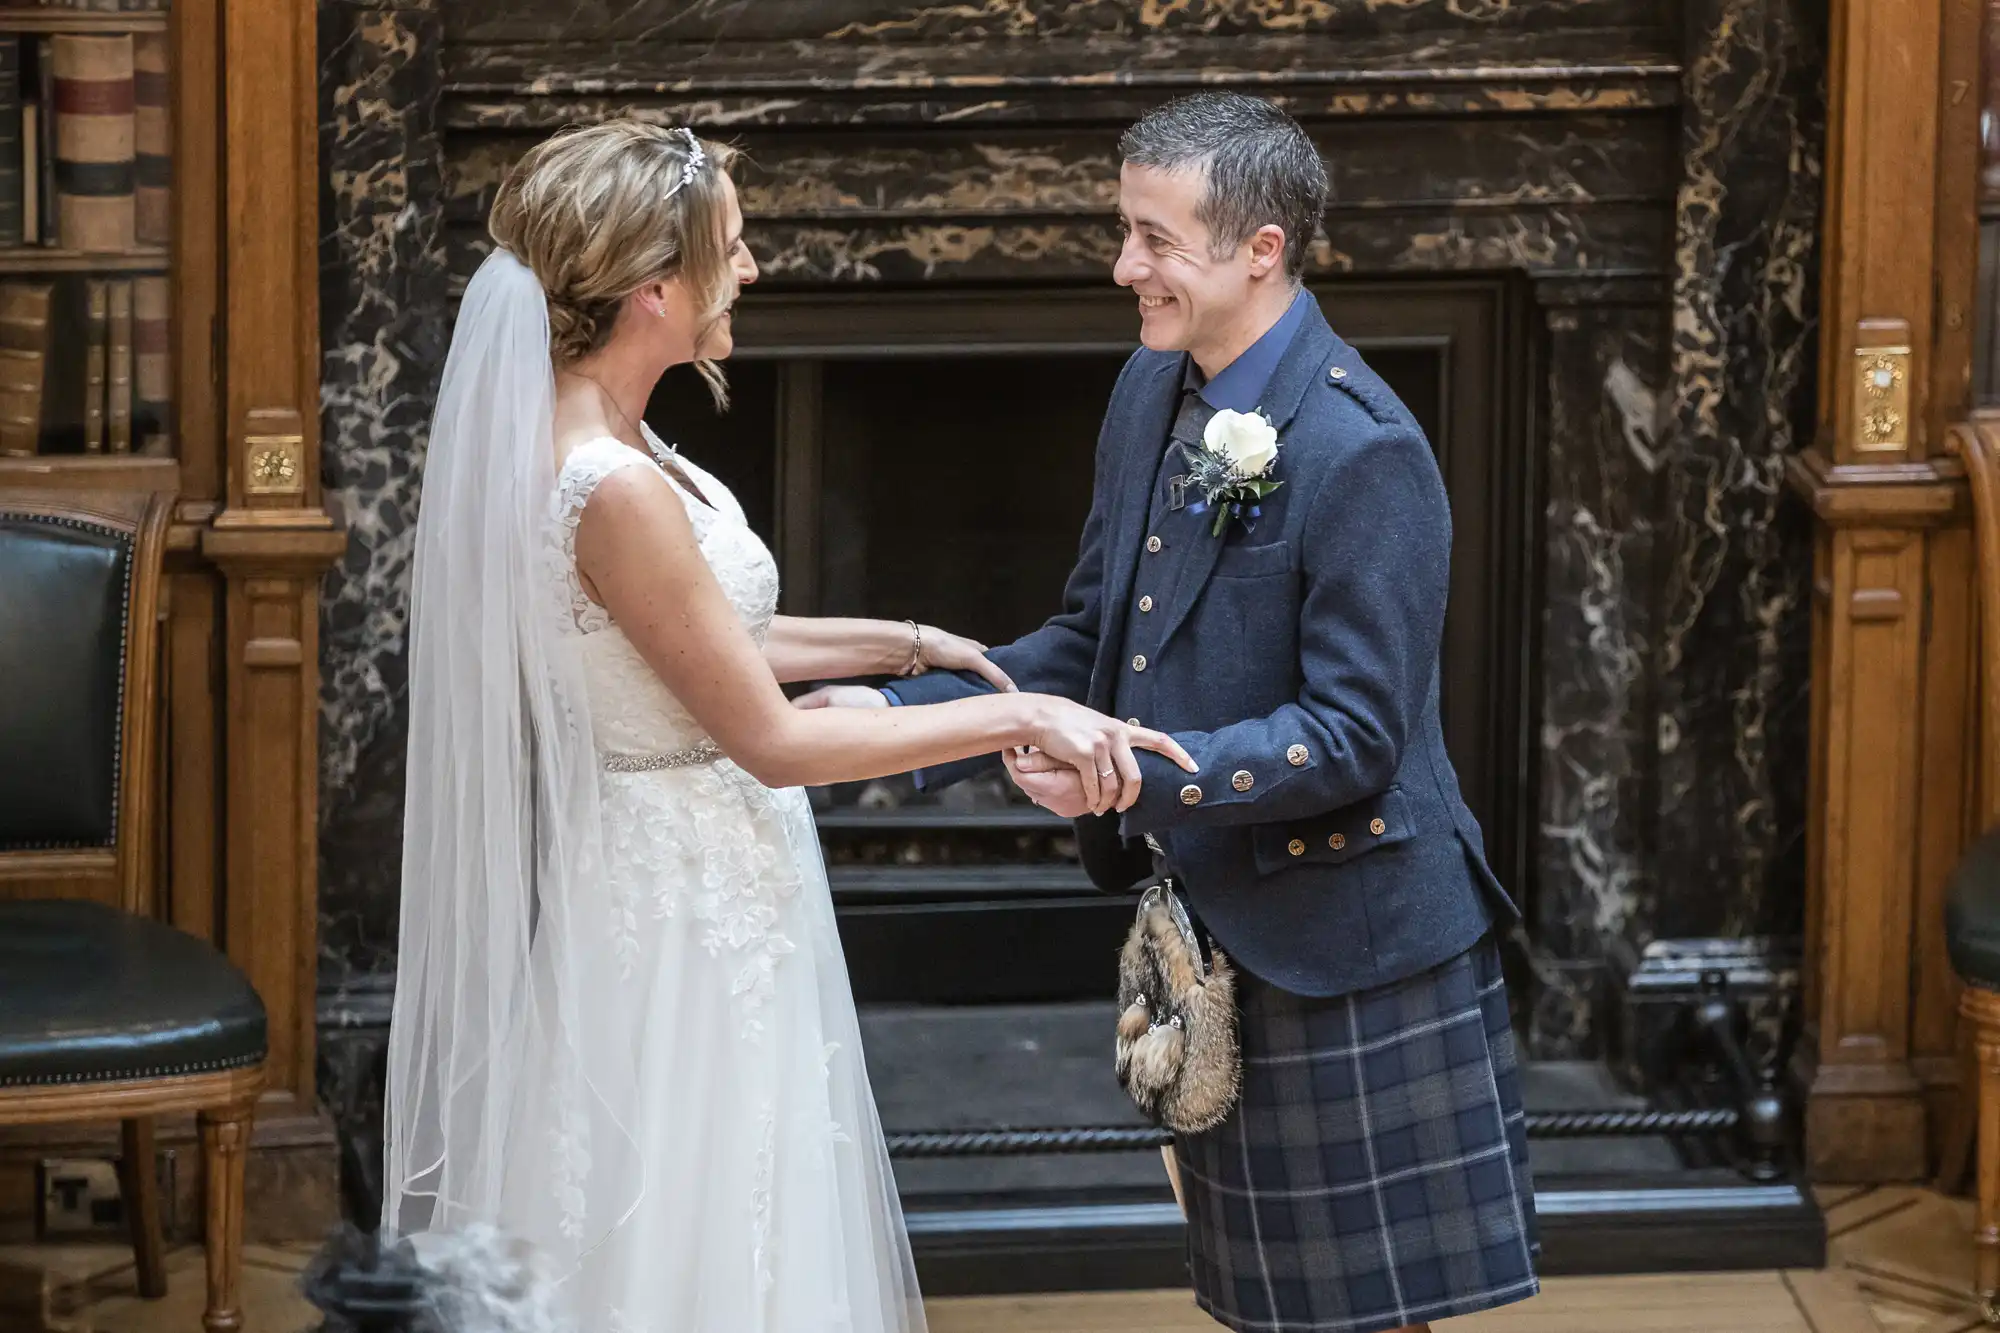 A couple stands, smiling and holding hands, during a wedding ceremony. The bride is in a white dress and veil, and the groom is in a kilt and formal jacket.